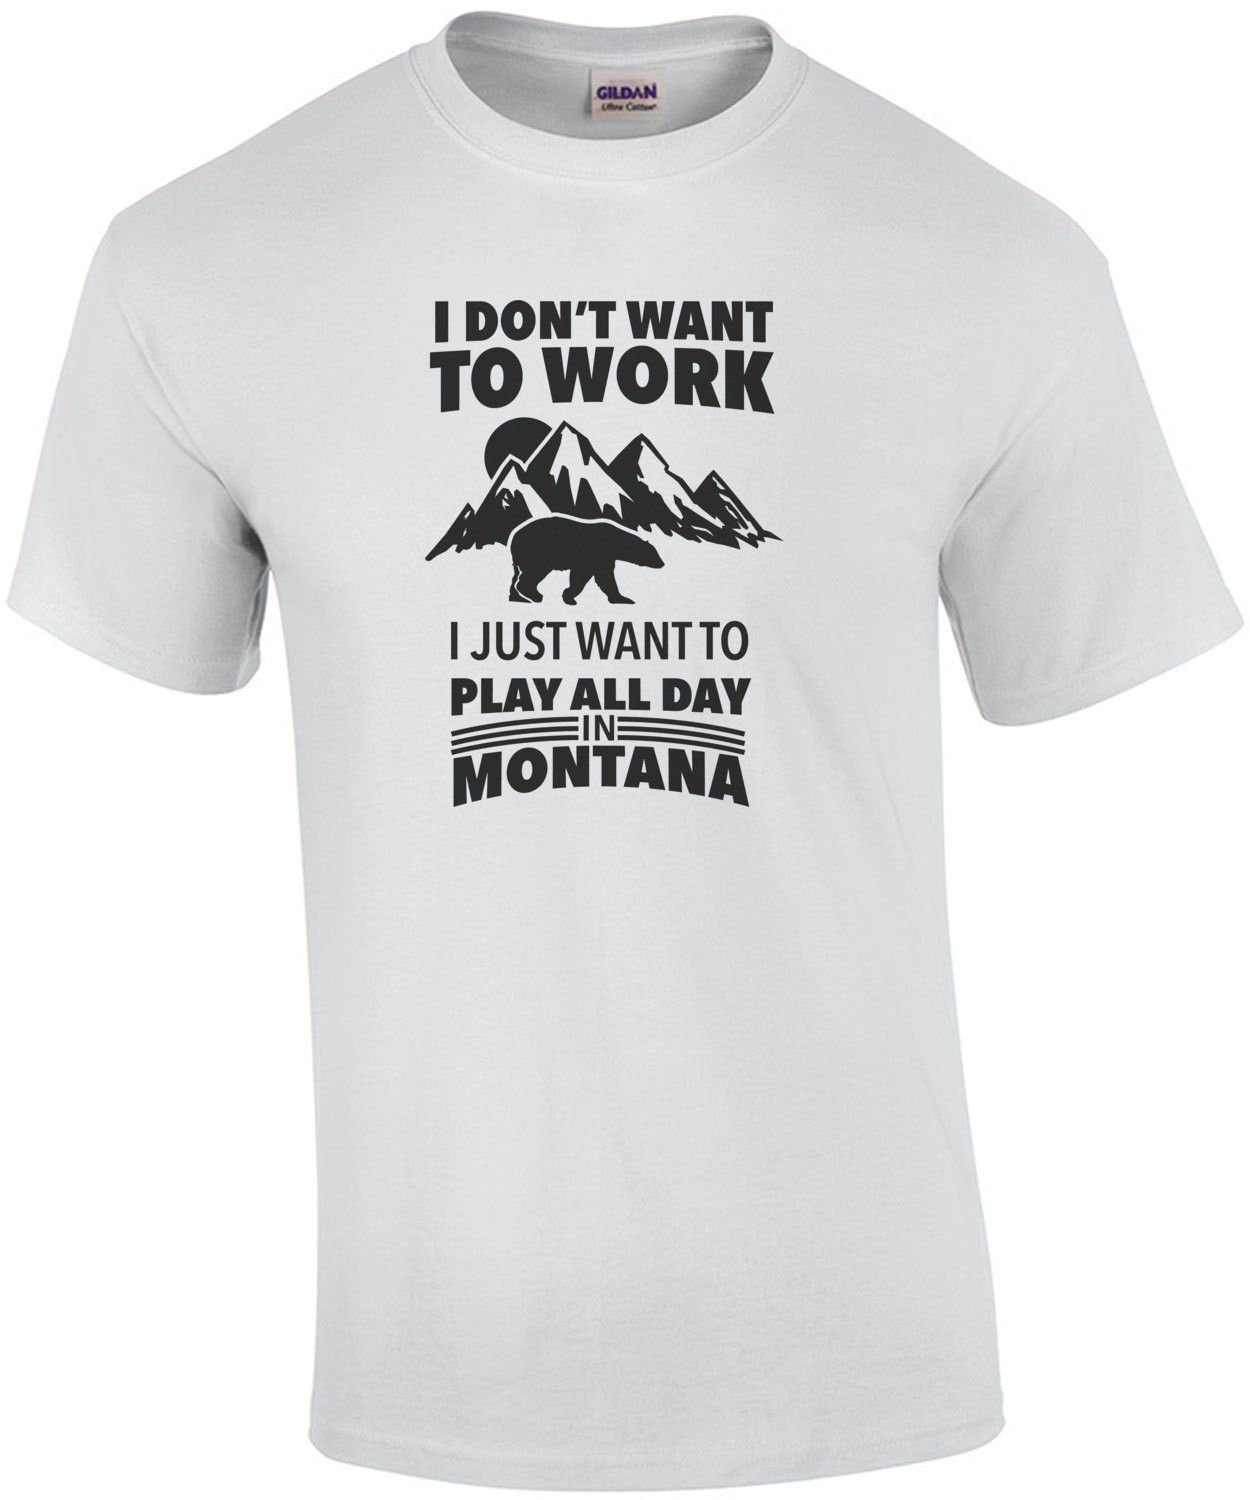 I don't want to work I just want to play all day in Montanna - Montana T-Shirt